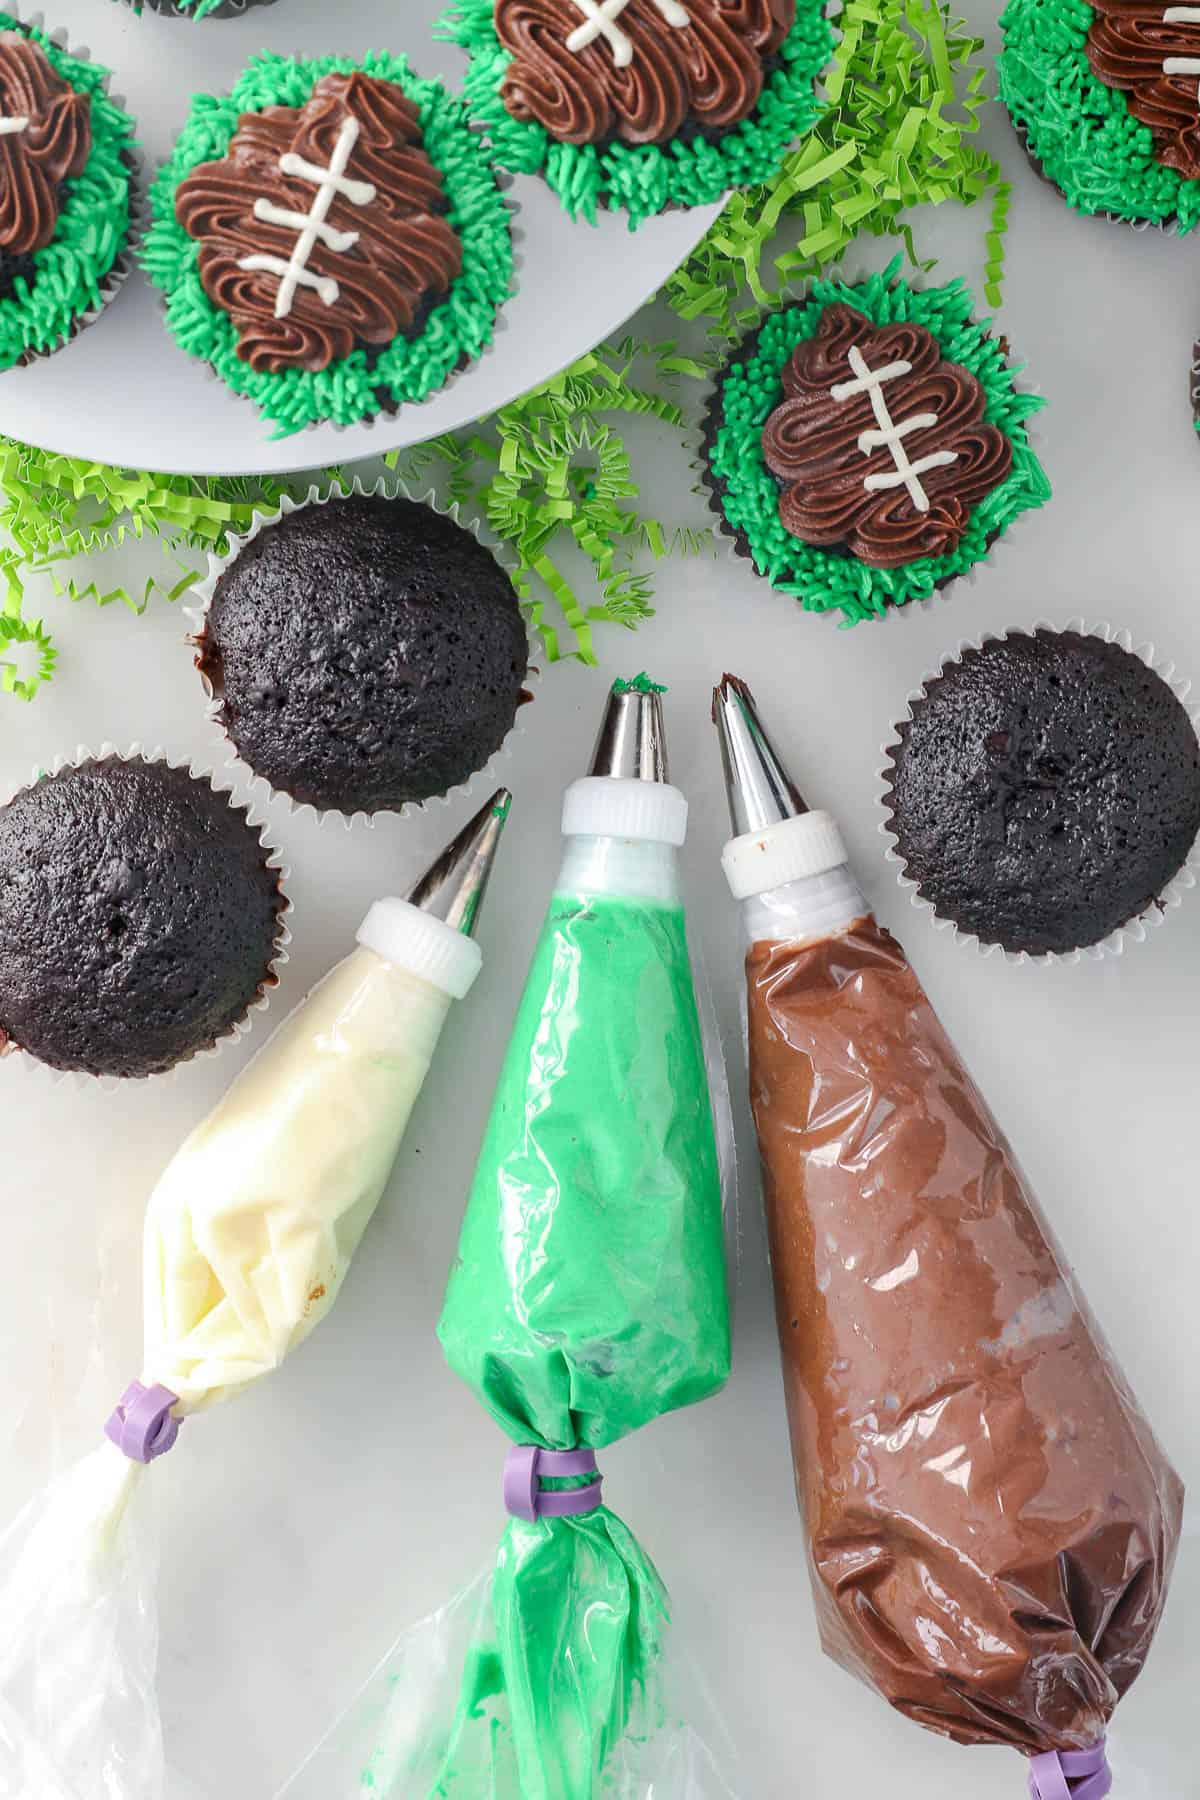 Overhead view of football cupcakes next to three piping bags fitted with tips, filled with white, green, and brown buttercream frosting.